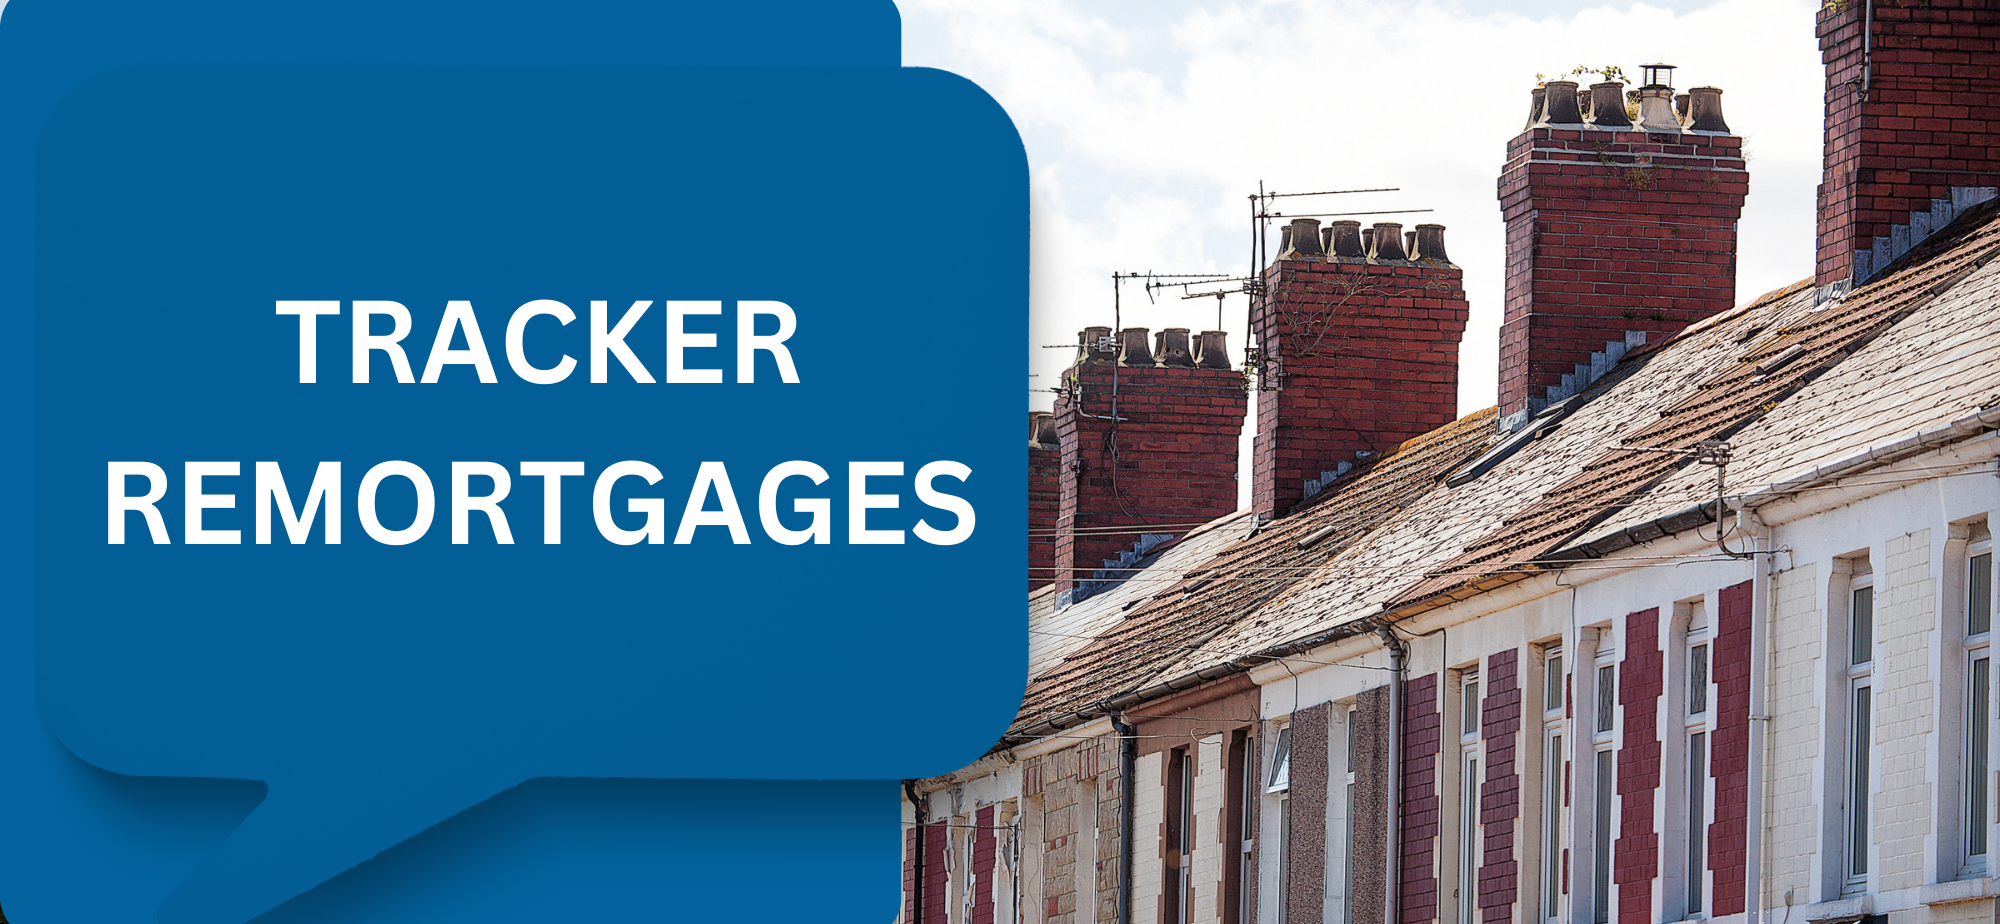 Tracker remortgages